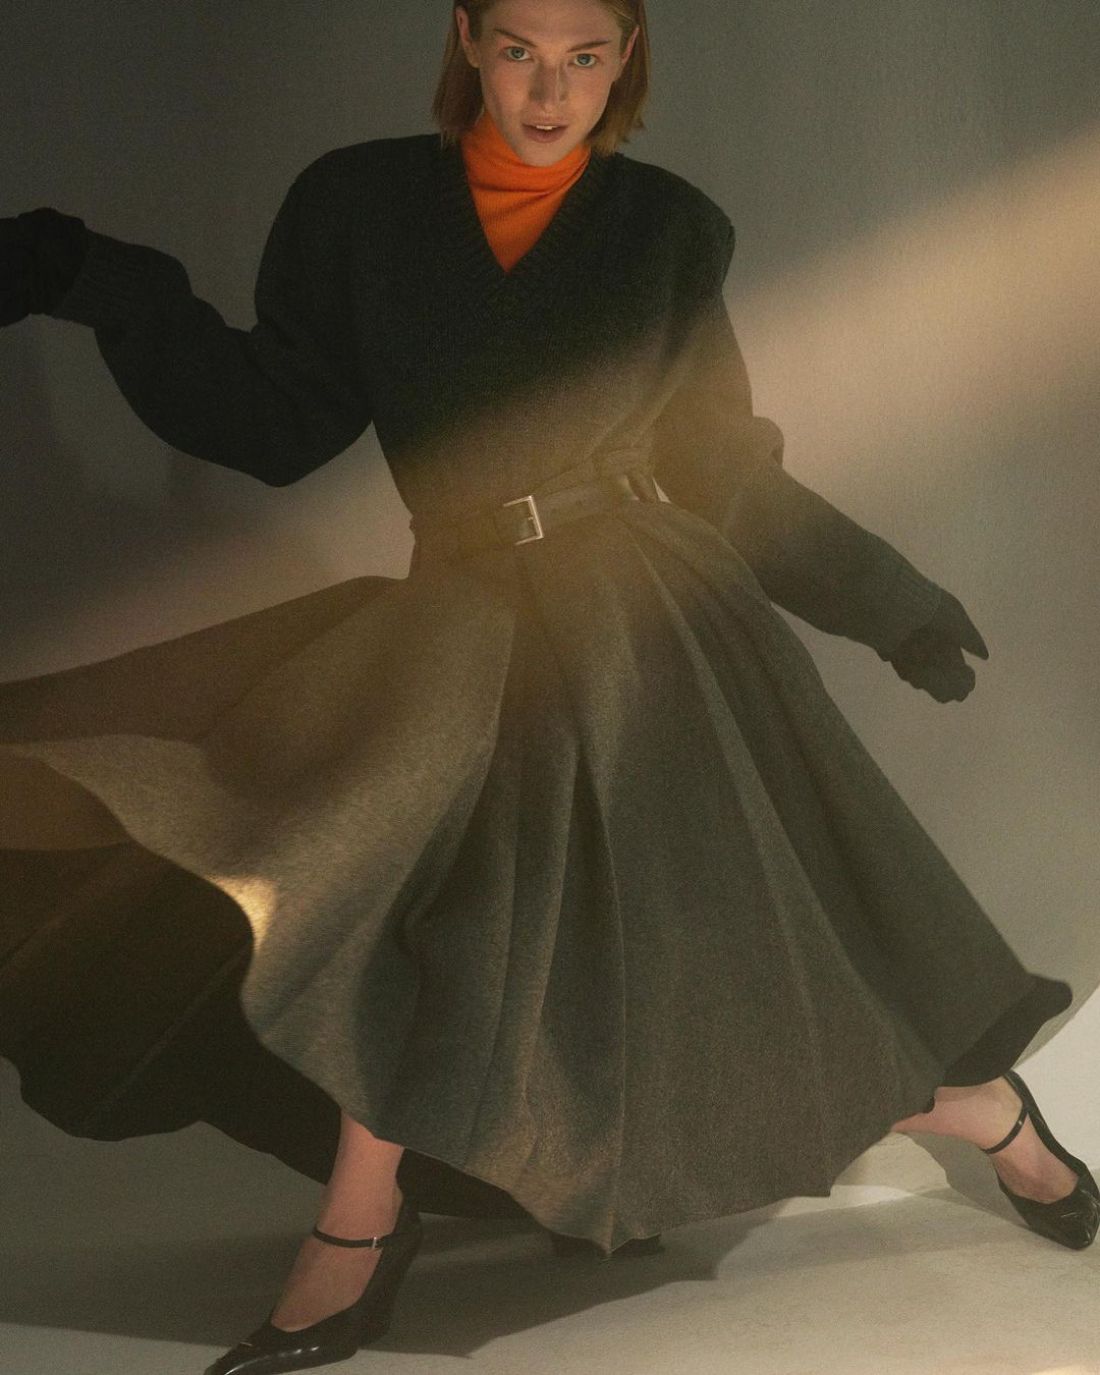 Prada Slate Gray Wool and cashmere V-neck sweater, midi-skirt and Red Turtleneck, Prada Black Brushed leather pumps Fashion Editorials